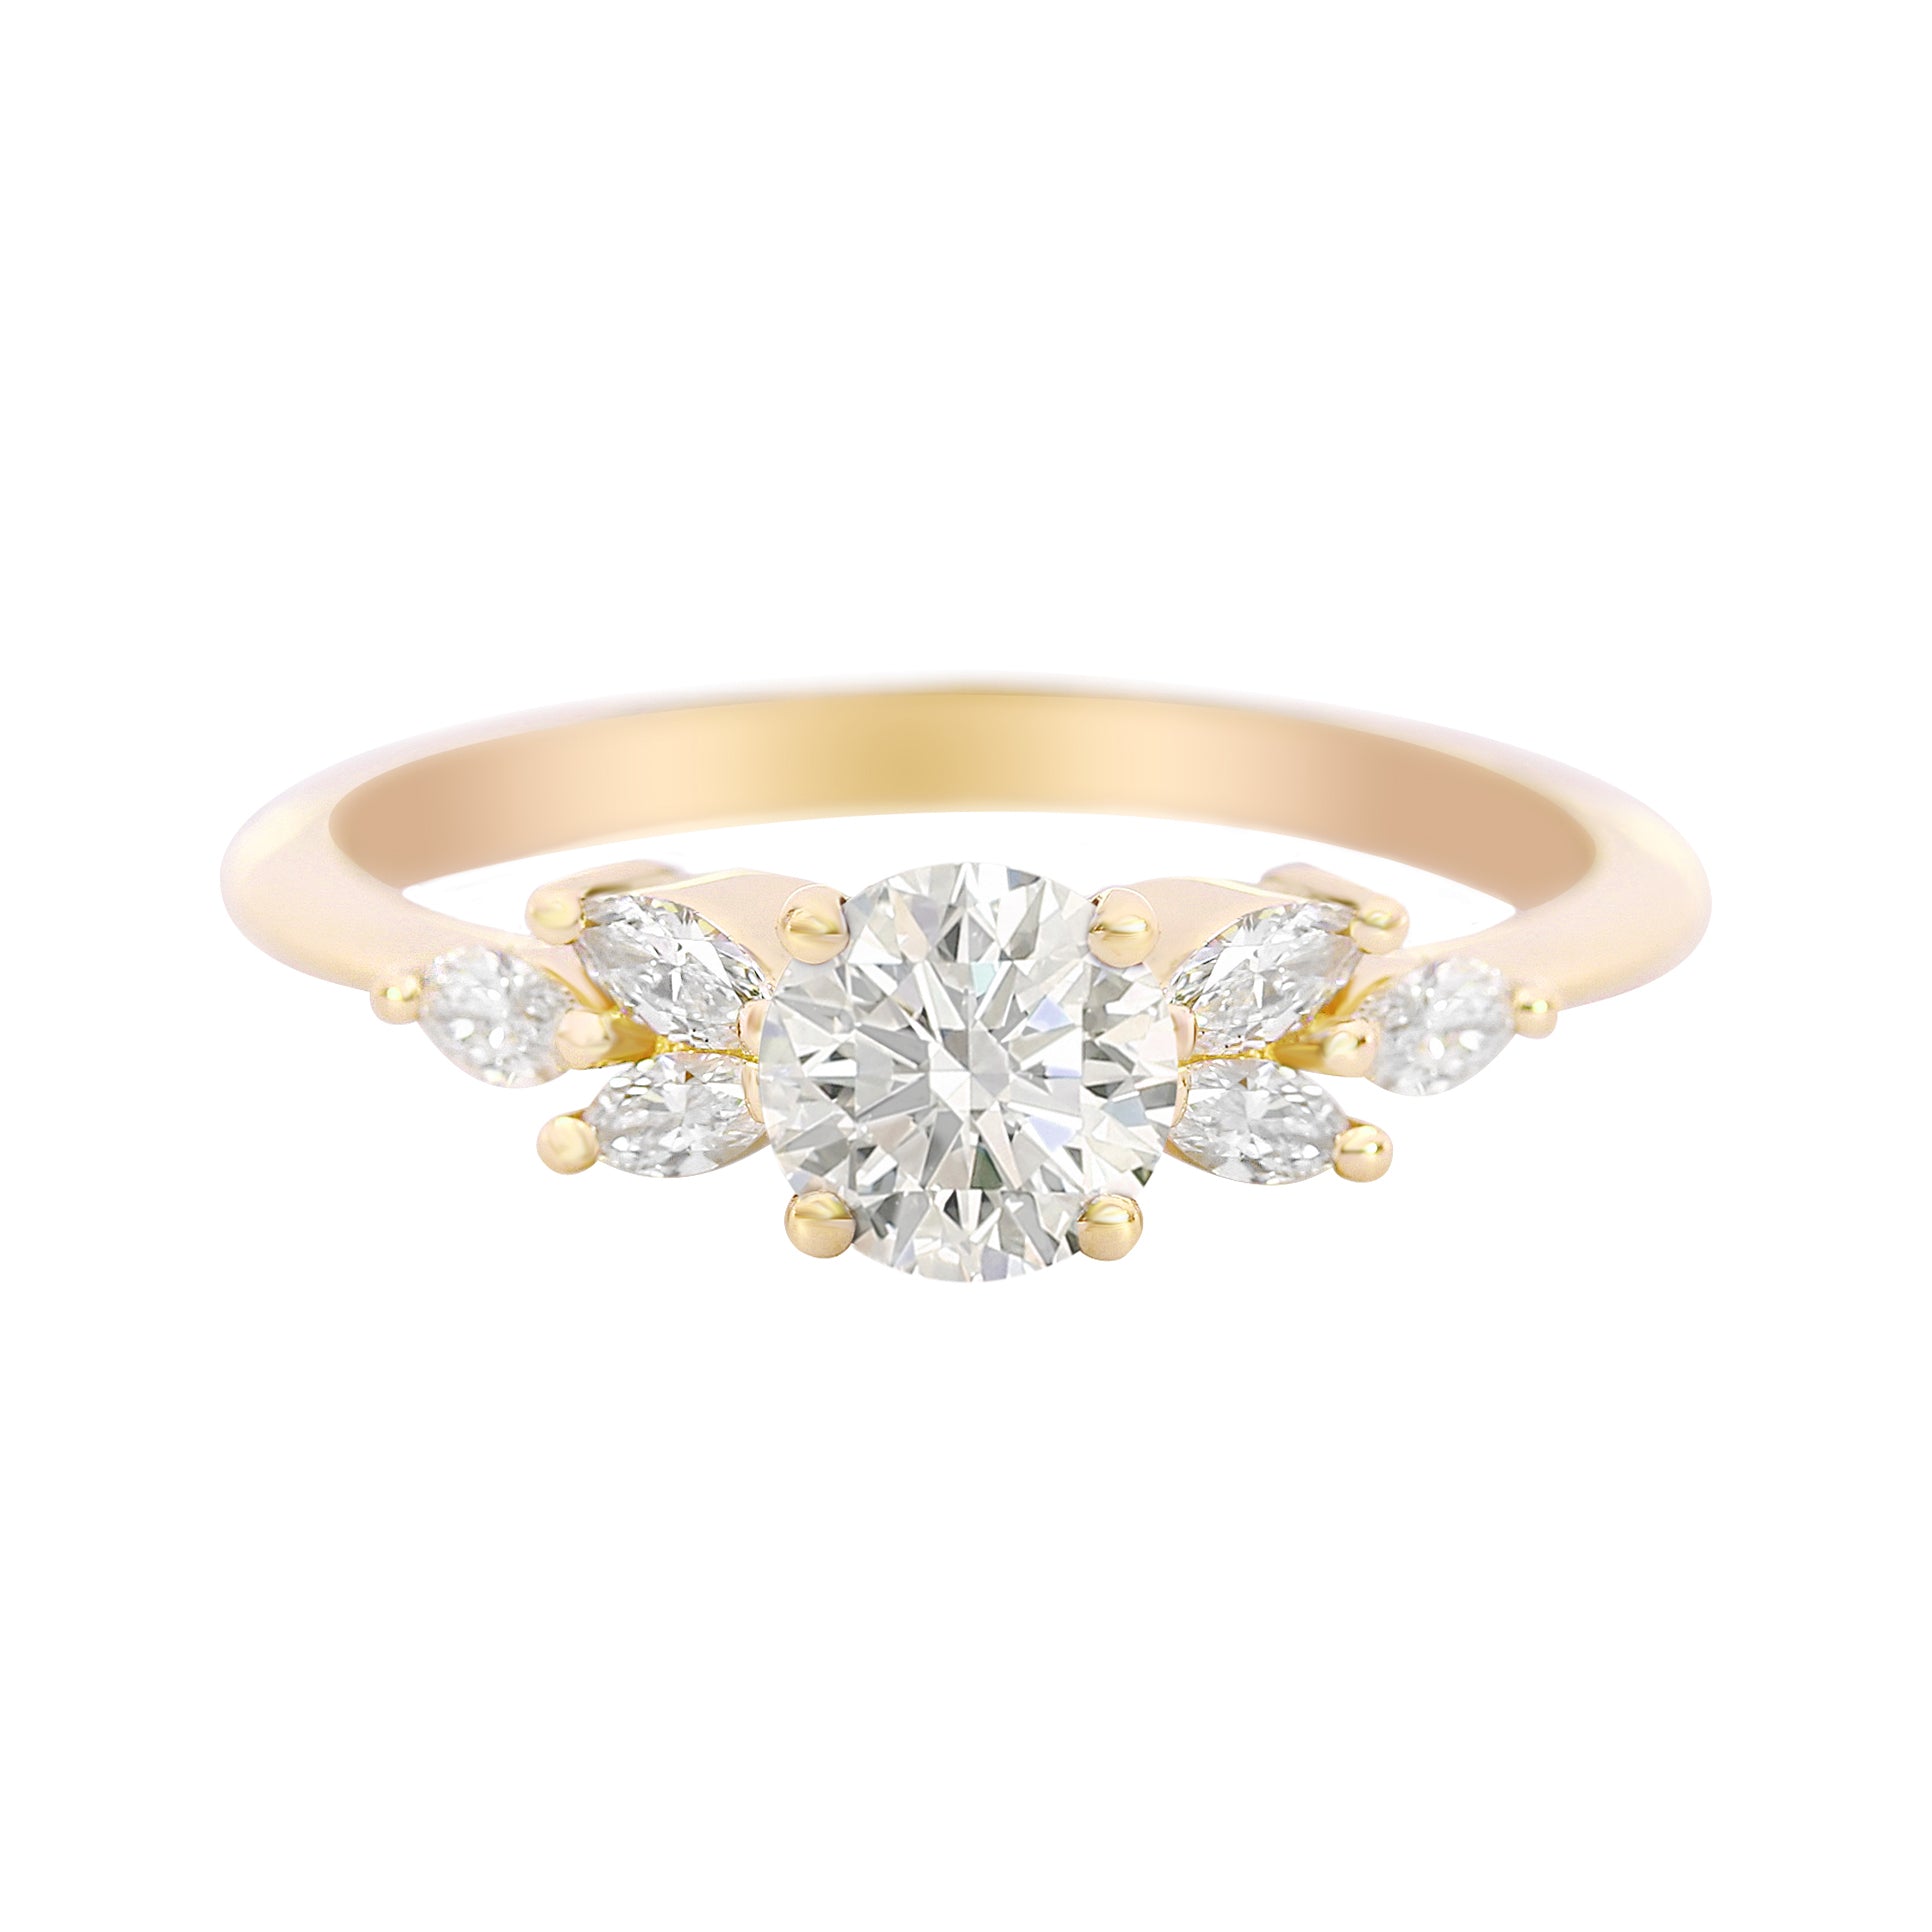 Round and marquise diamond engagement ring, "Penelope"